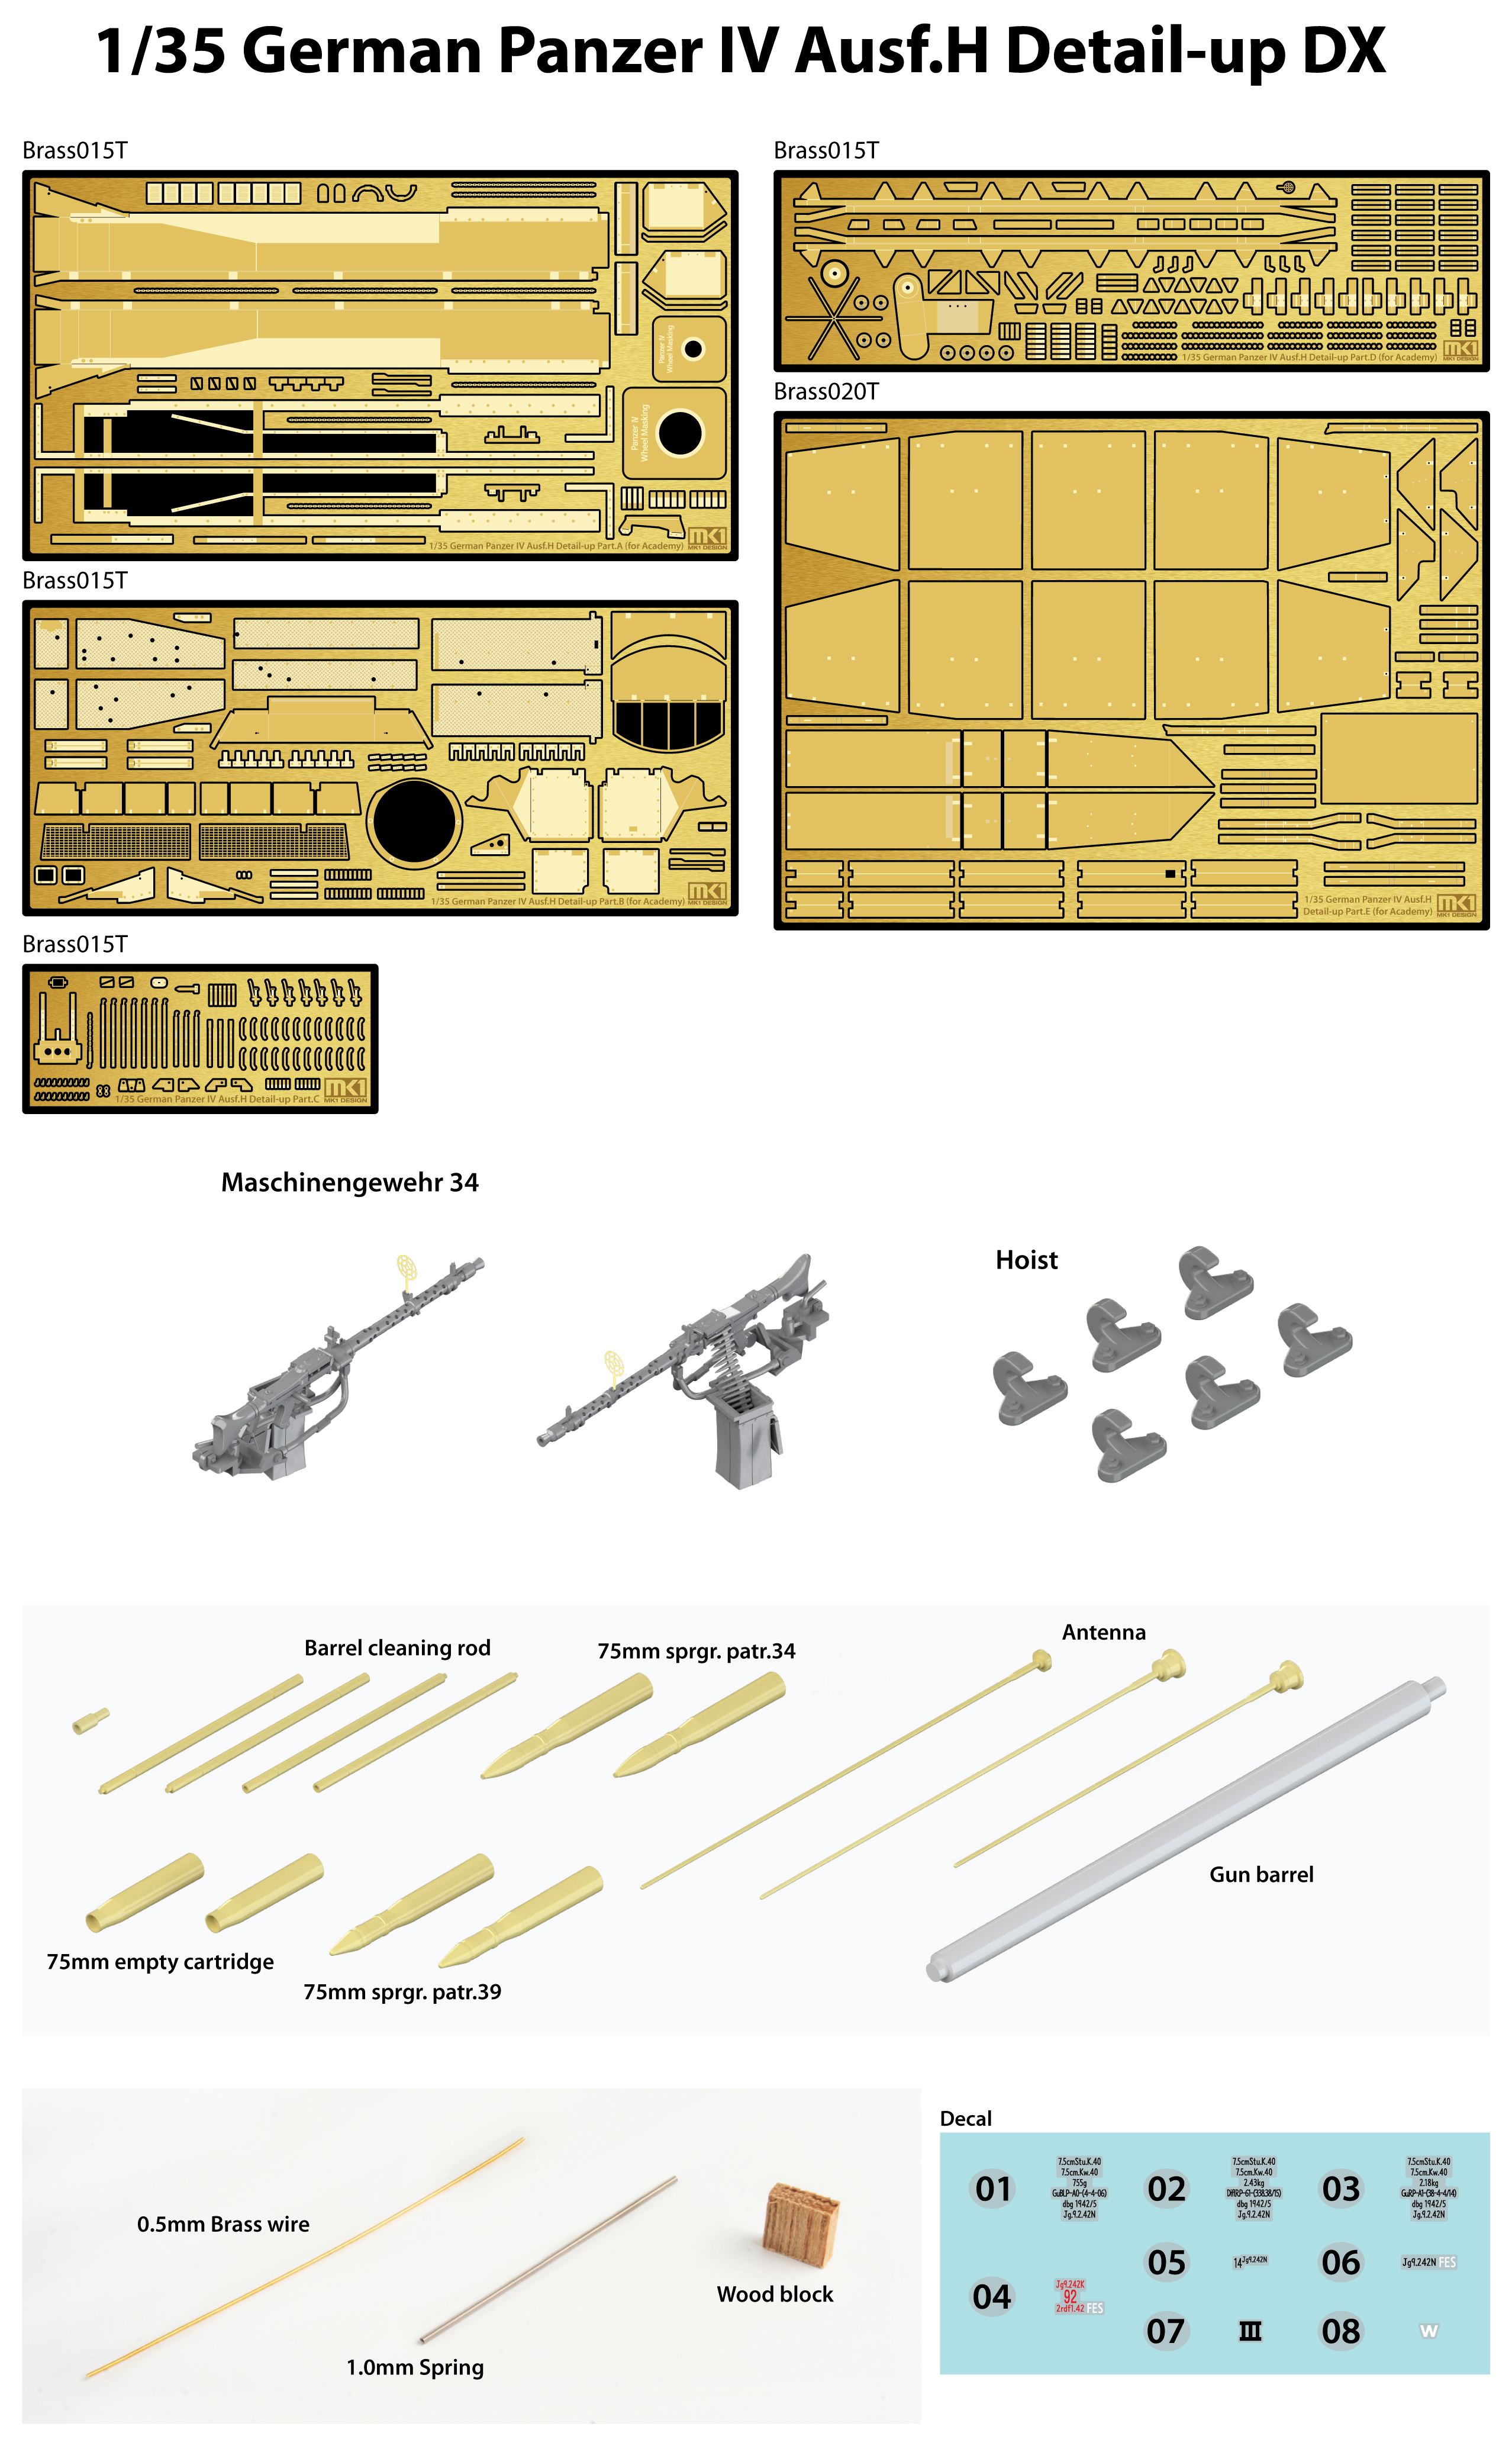 1/35 German Pz.Kpfw.IV Ausf.H DX Pack Detail Up Set for Academy - Click Image to Close